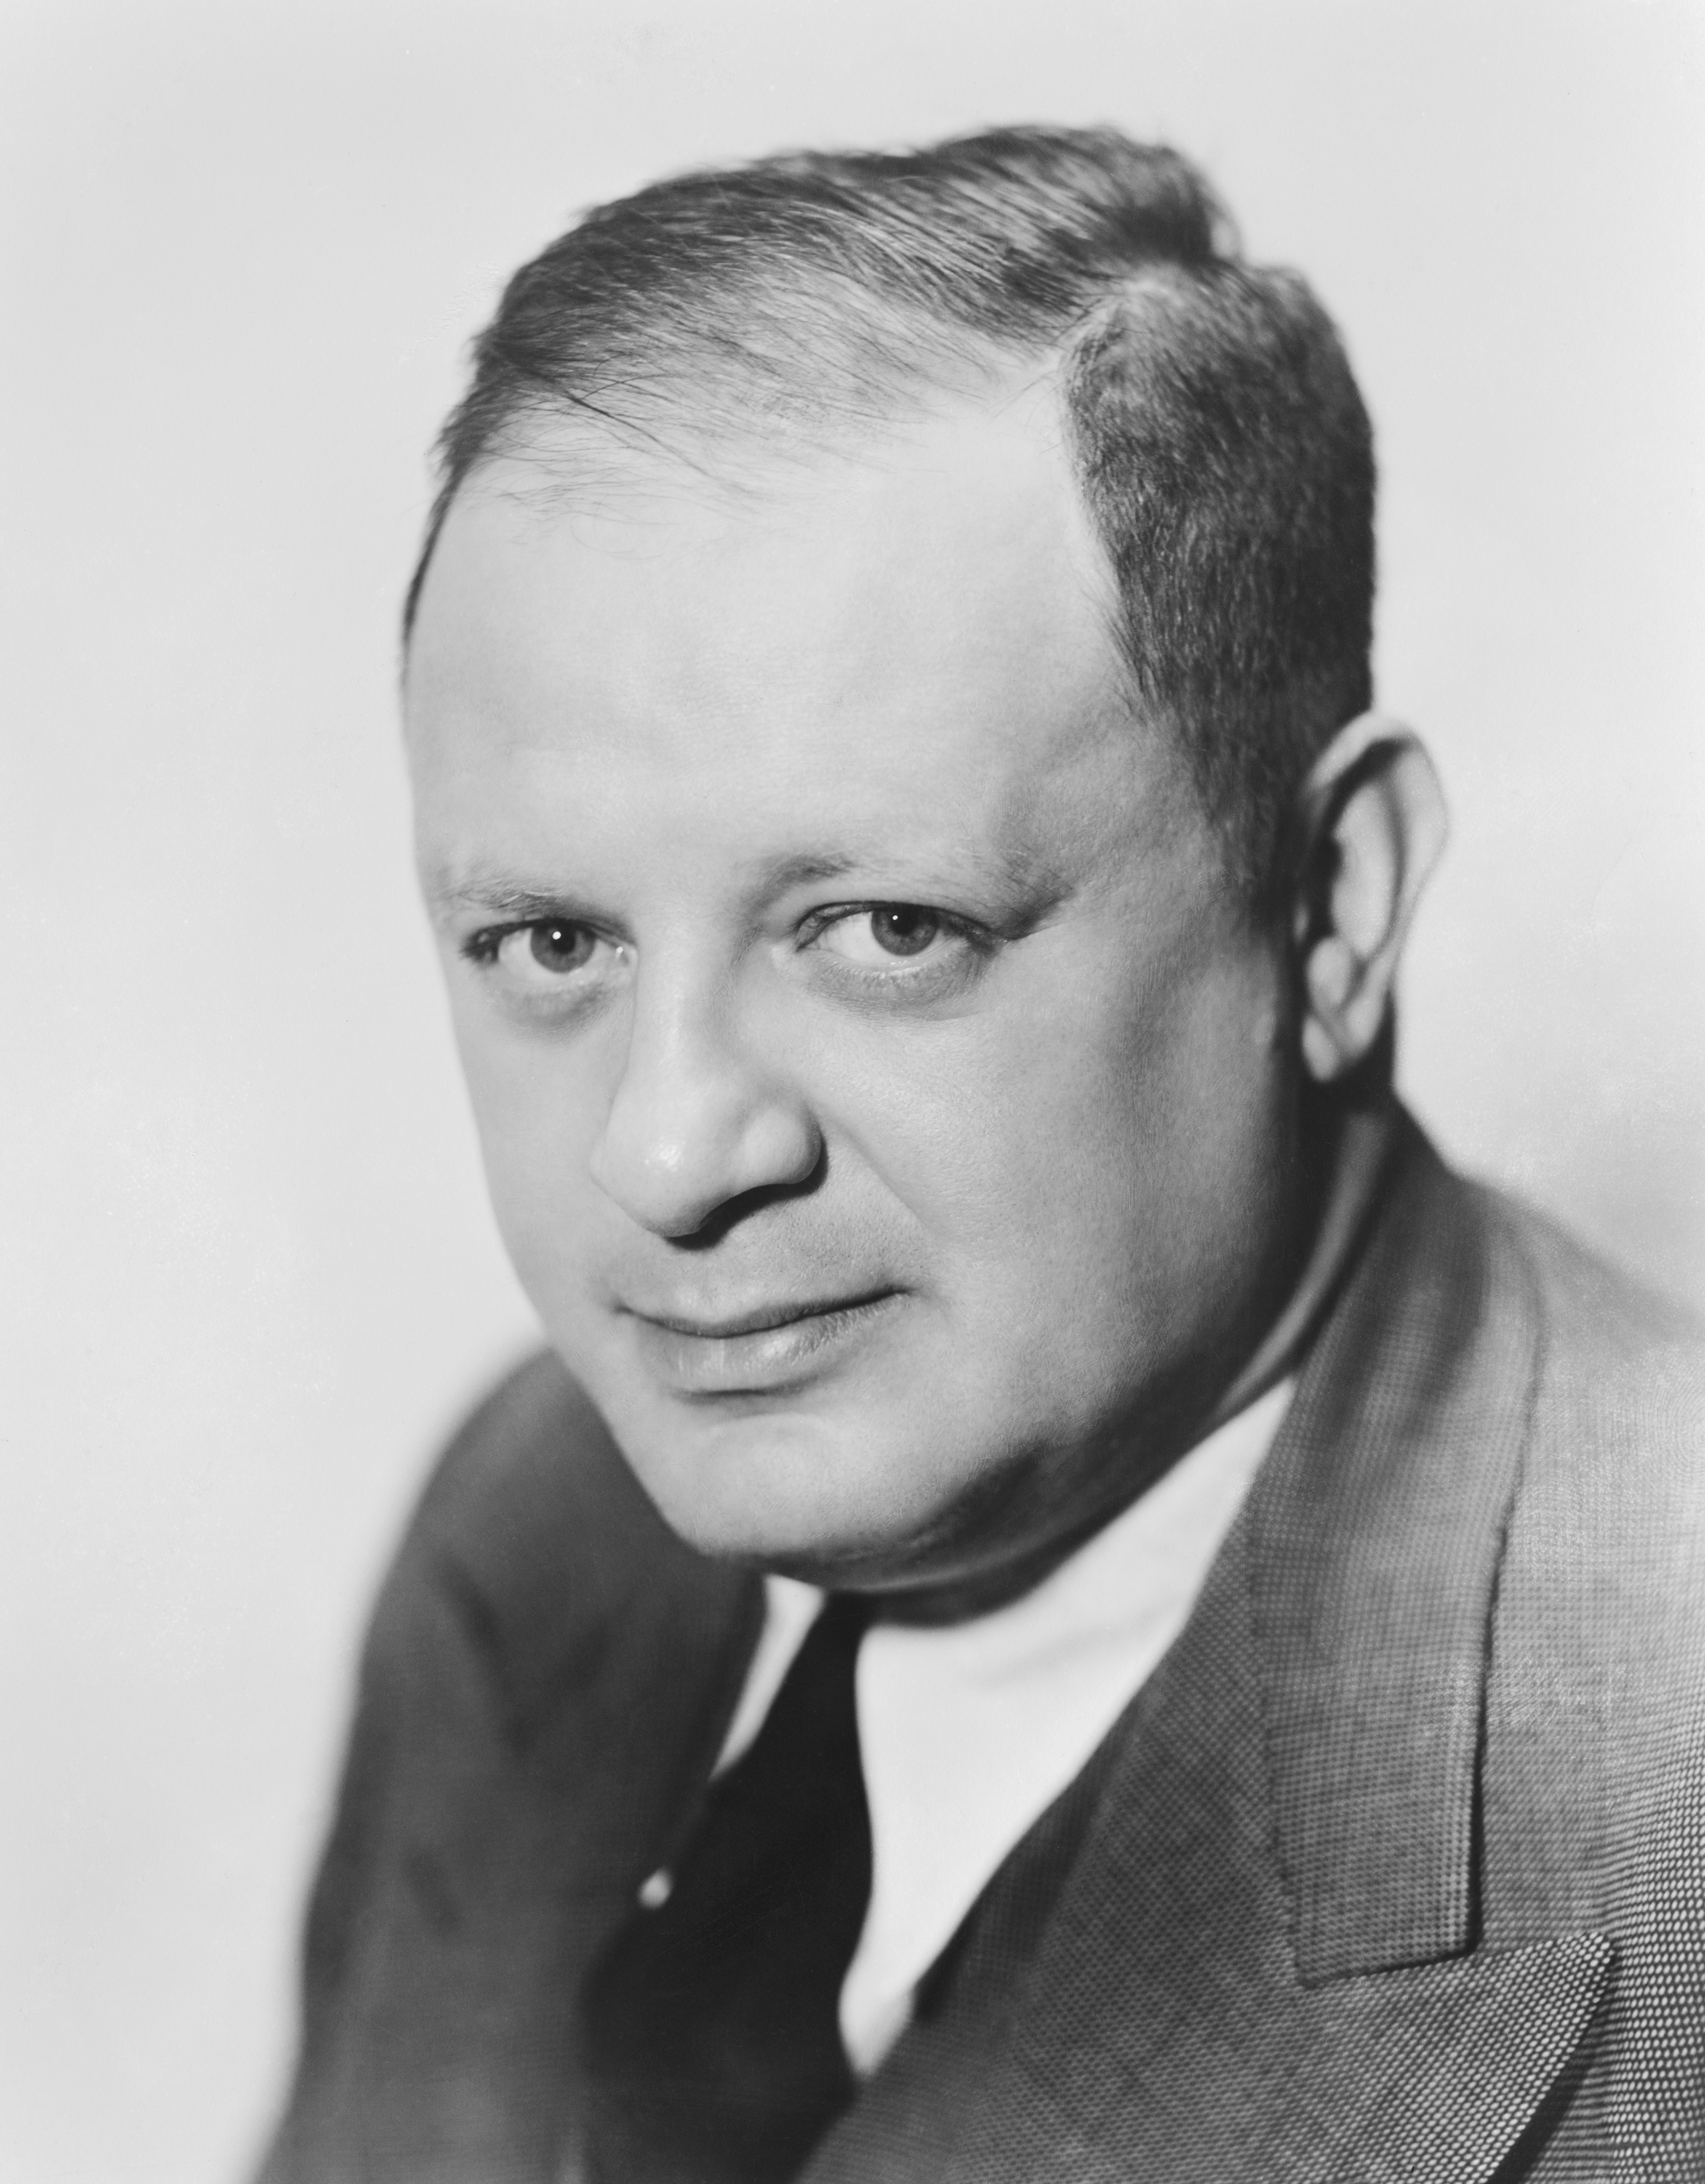 Herman Mankiewicz, MGM contract writer and the screenwriter for "Citizen Kane." Ca. 1940s. (Corbis via Getty Images)